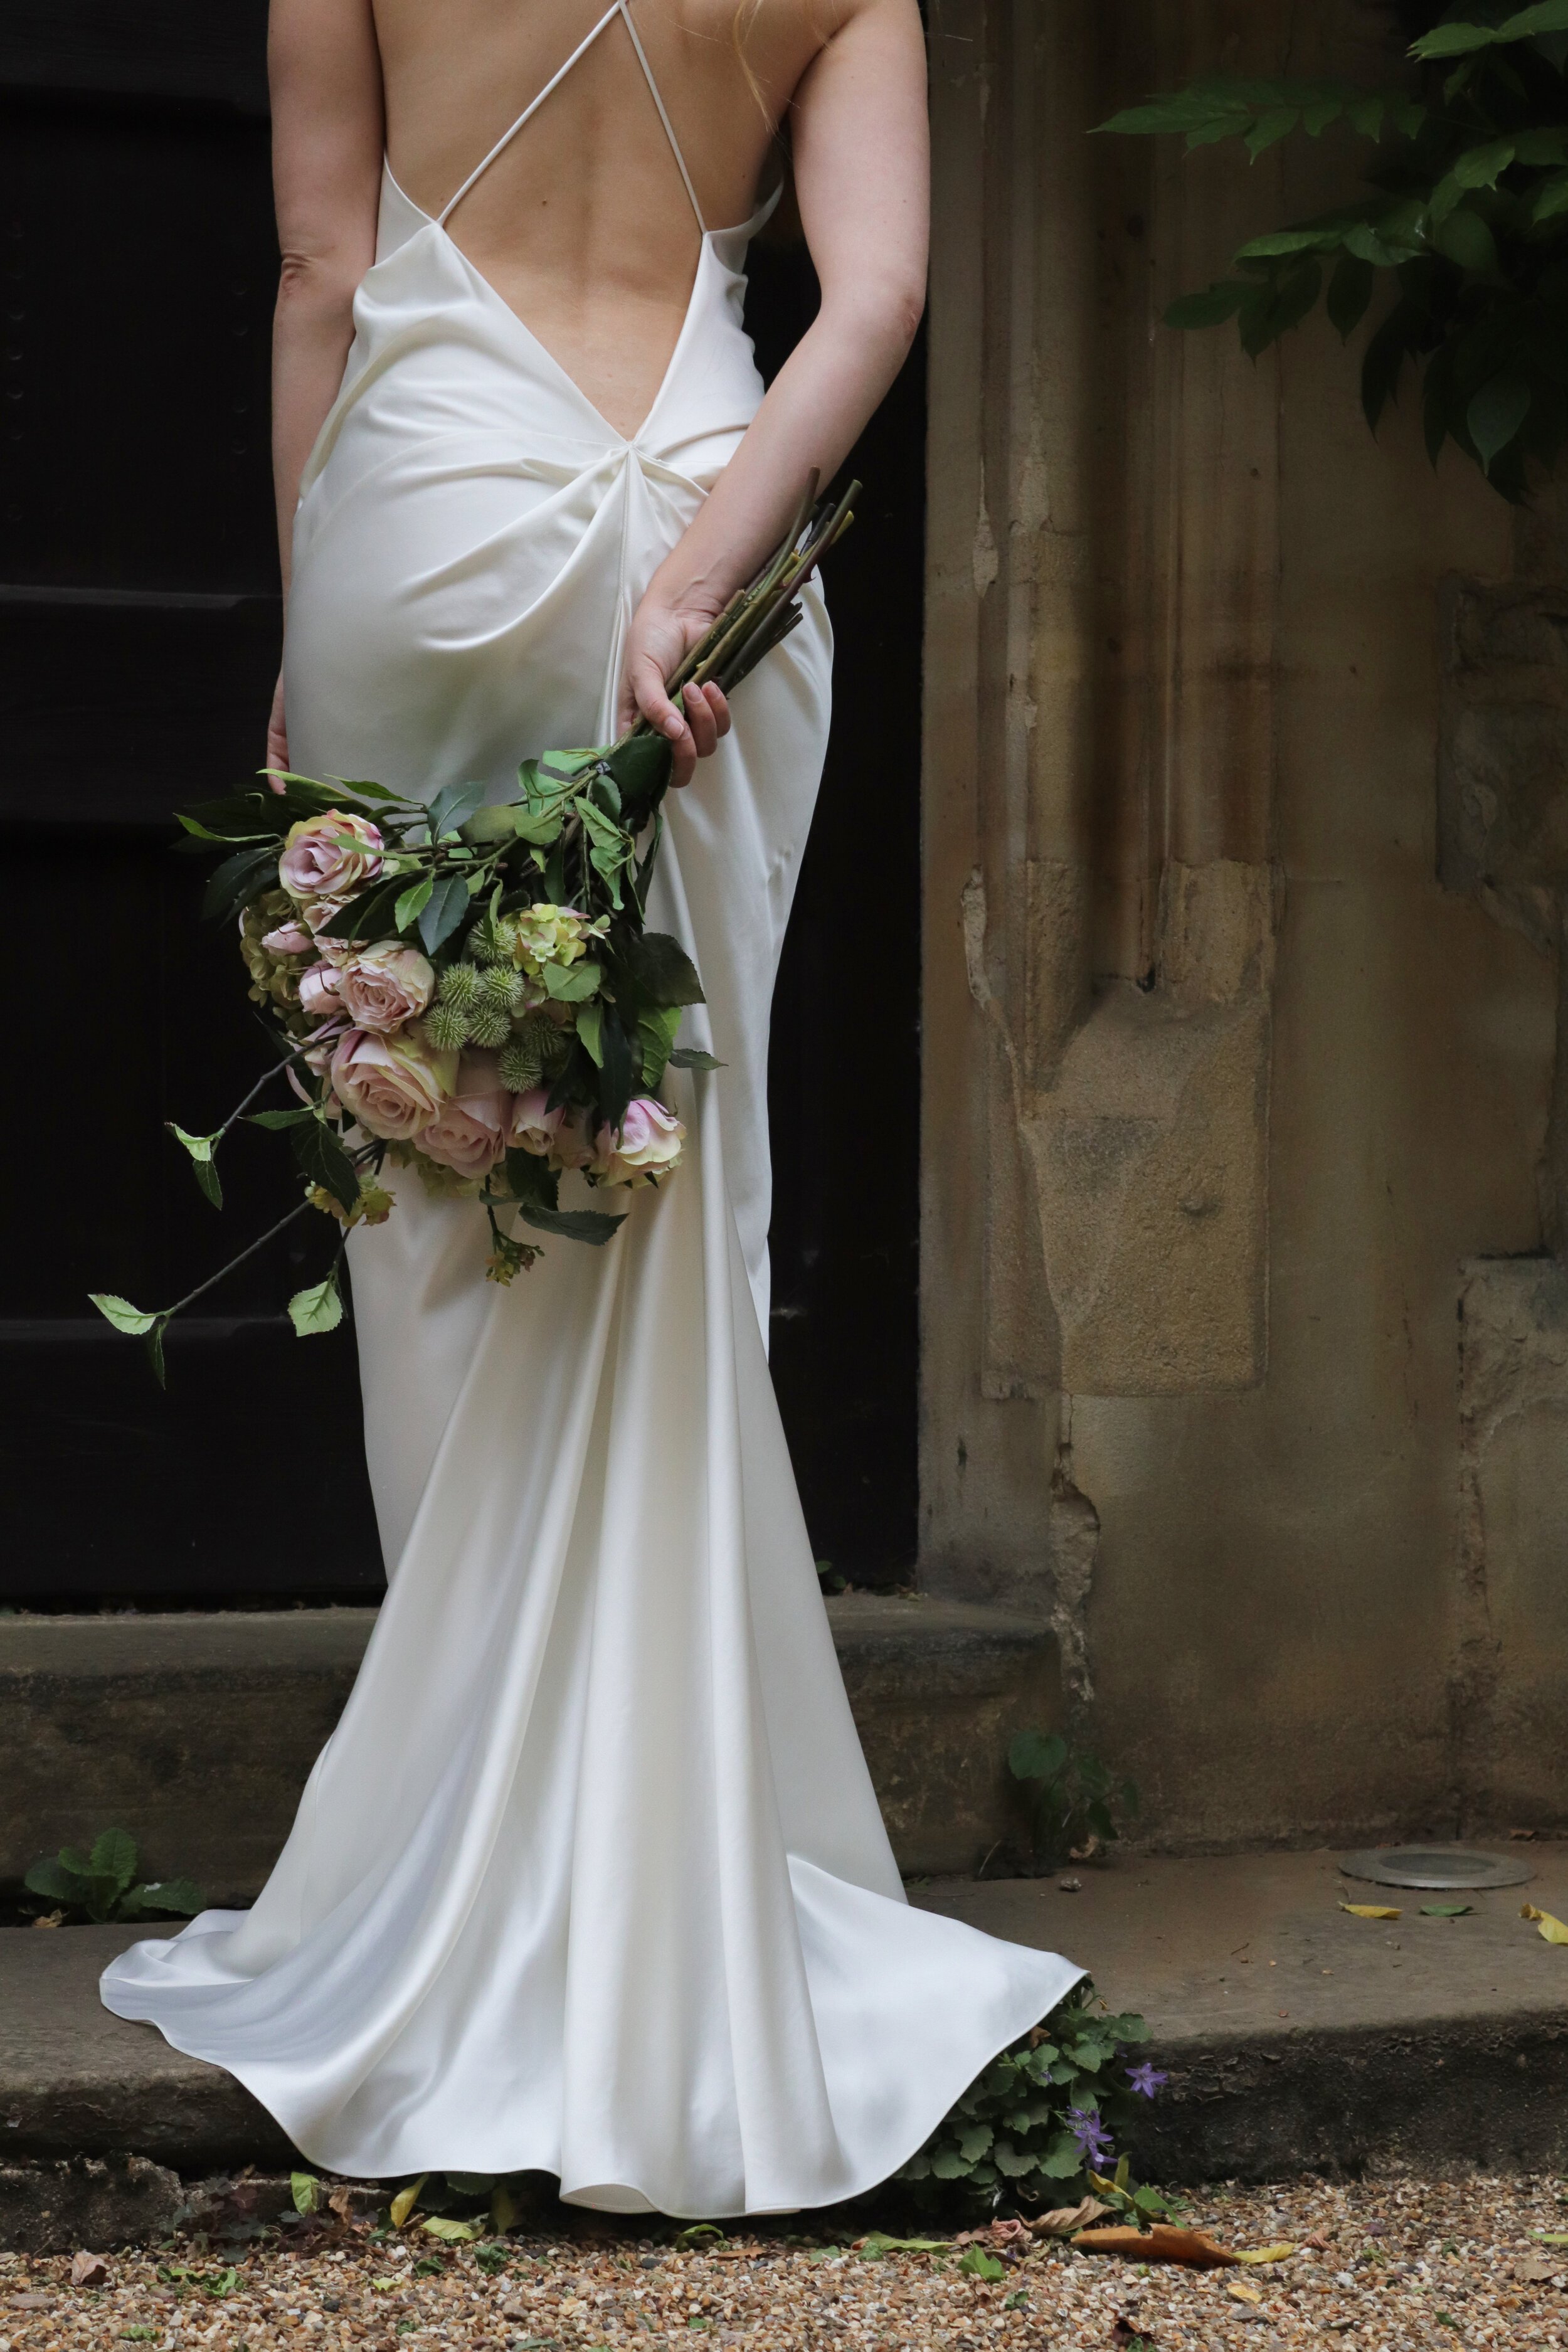 Halfpenny London partners with My Wardrobe to rent a selection of bridal wear | Wedding dress by Halfpenny London